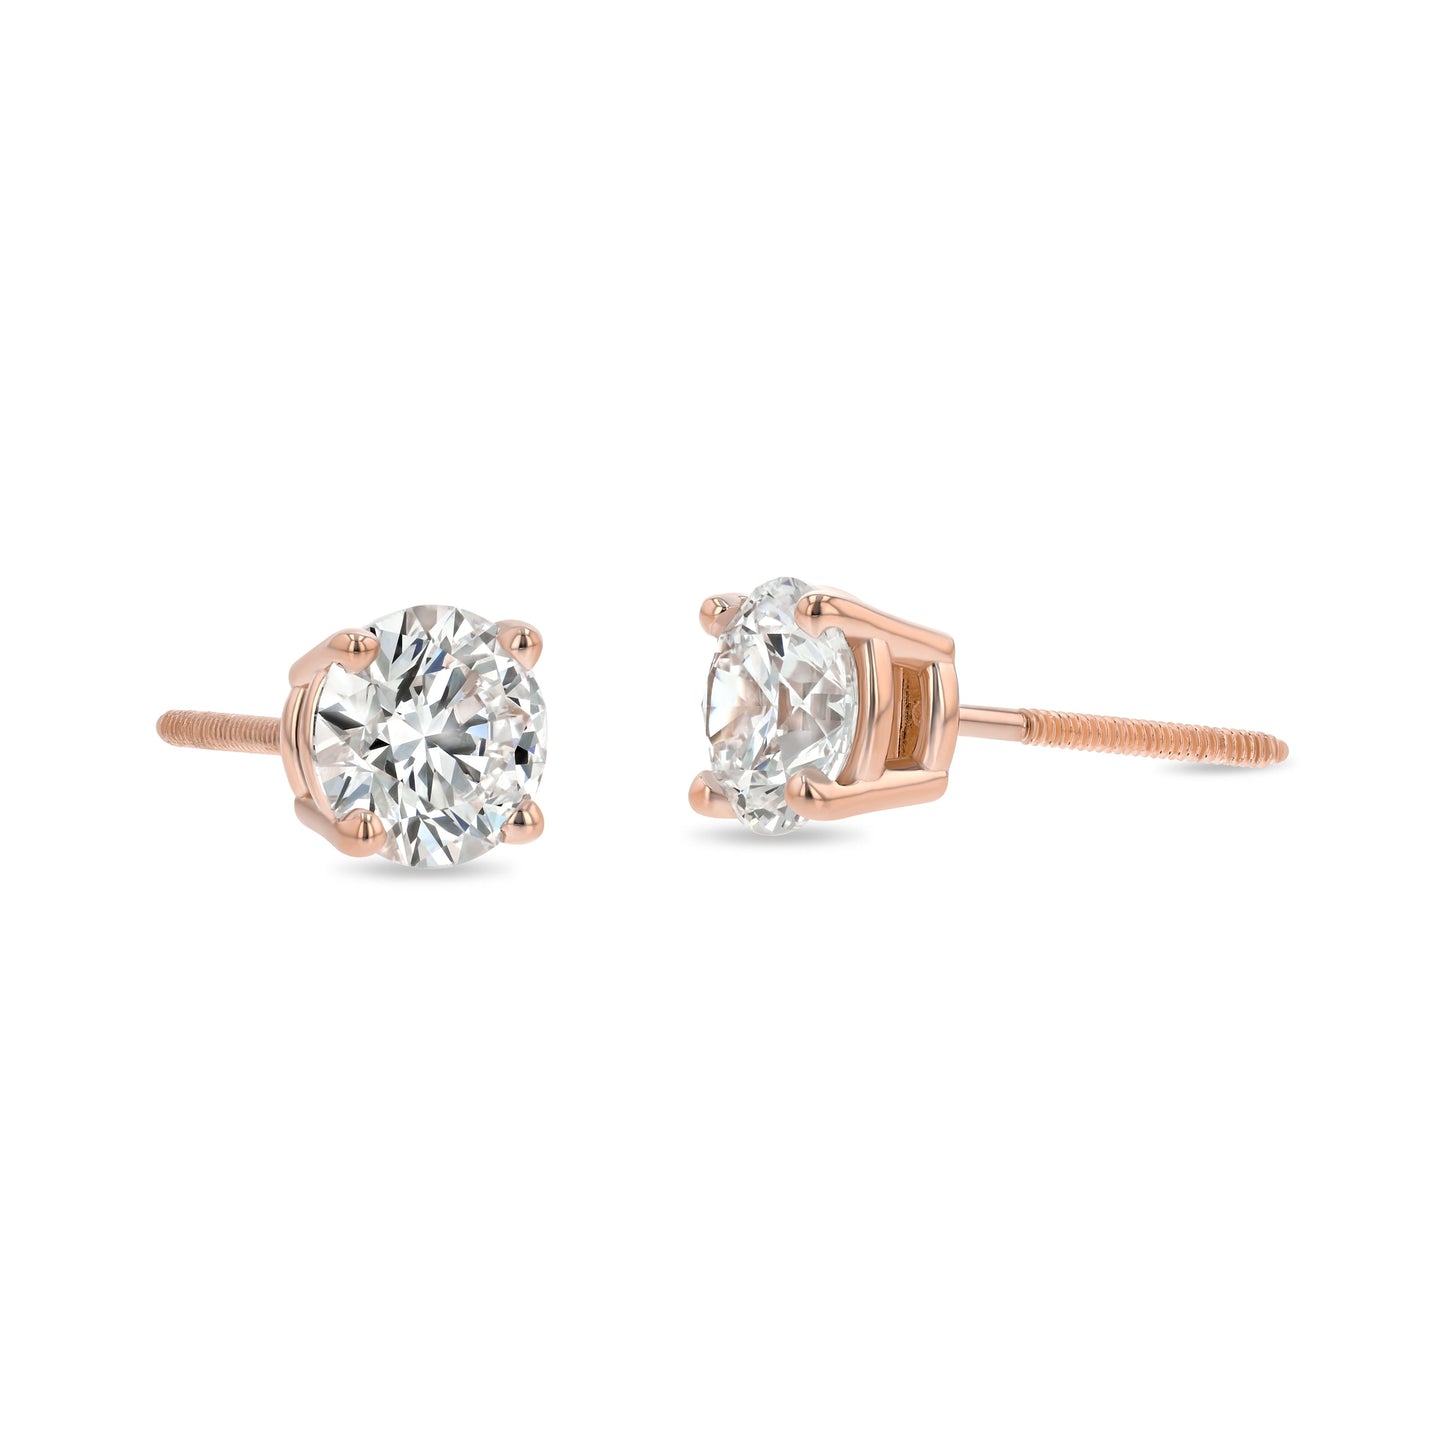 14k Rose Gold 4-prong Round Diamond Stud Earrings 1ctw (5.00mm Ea), G Color, Si3 Clarity